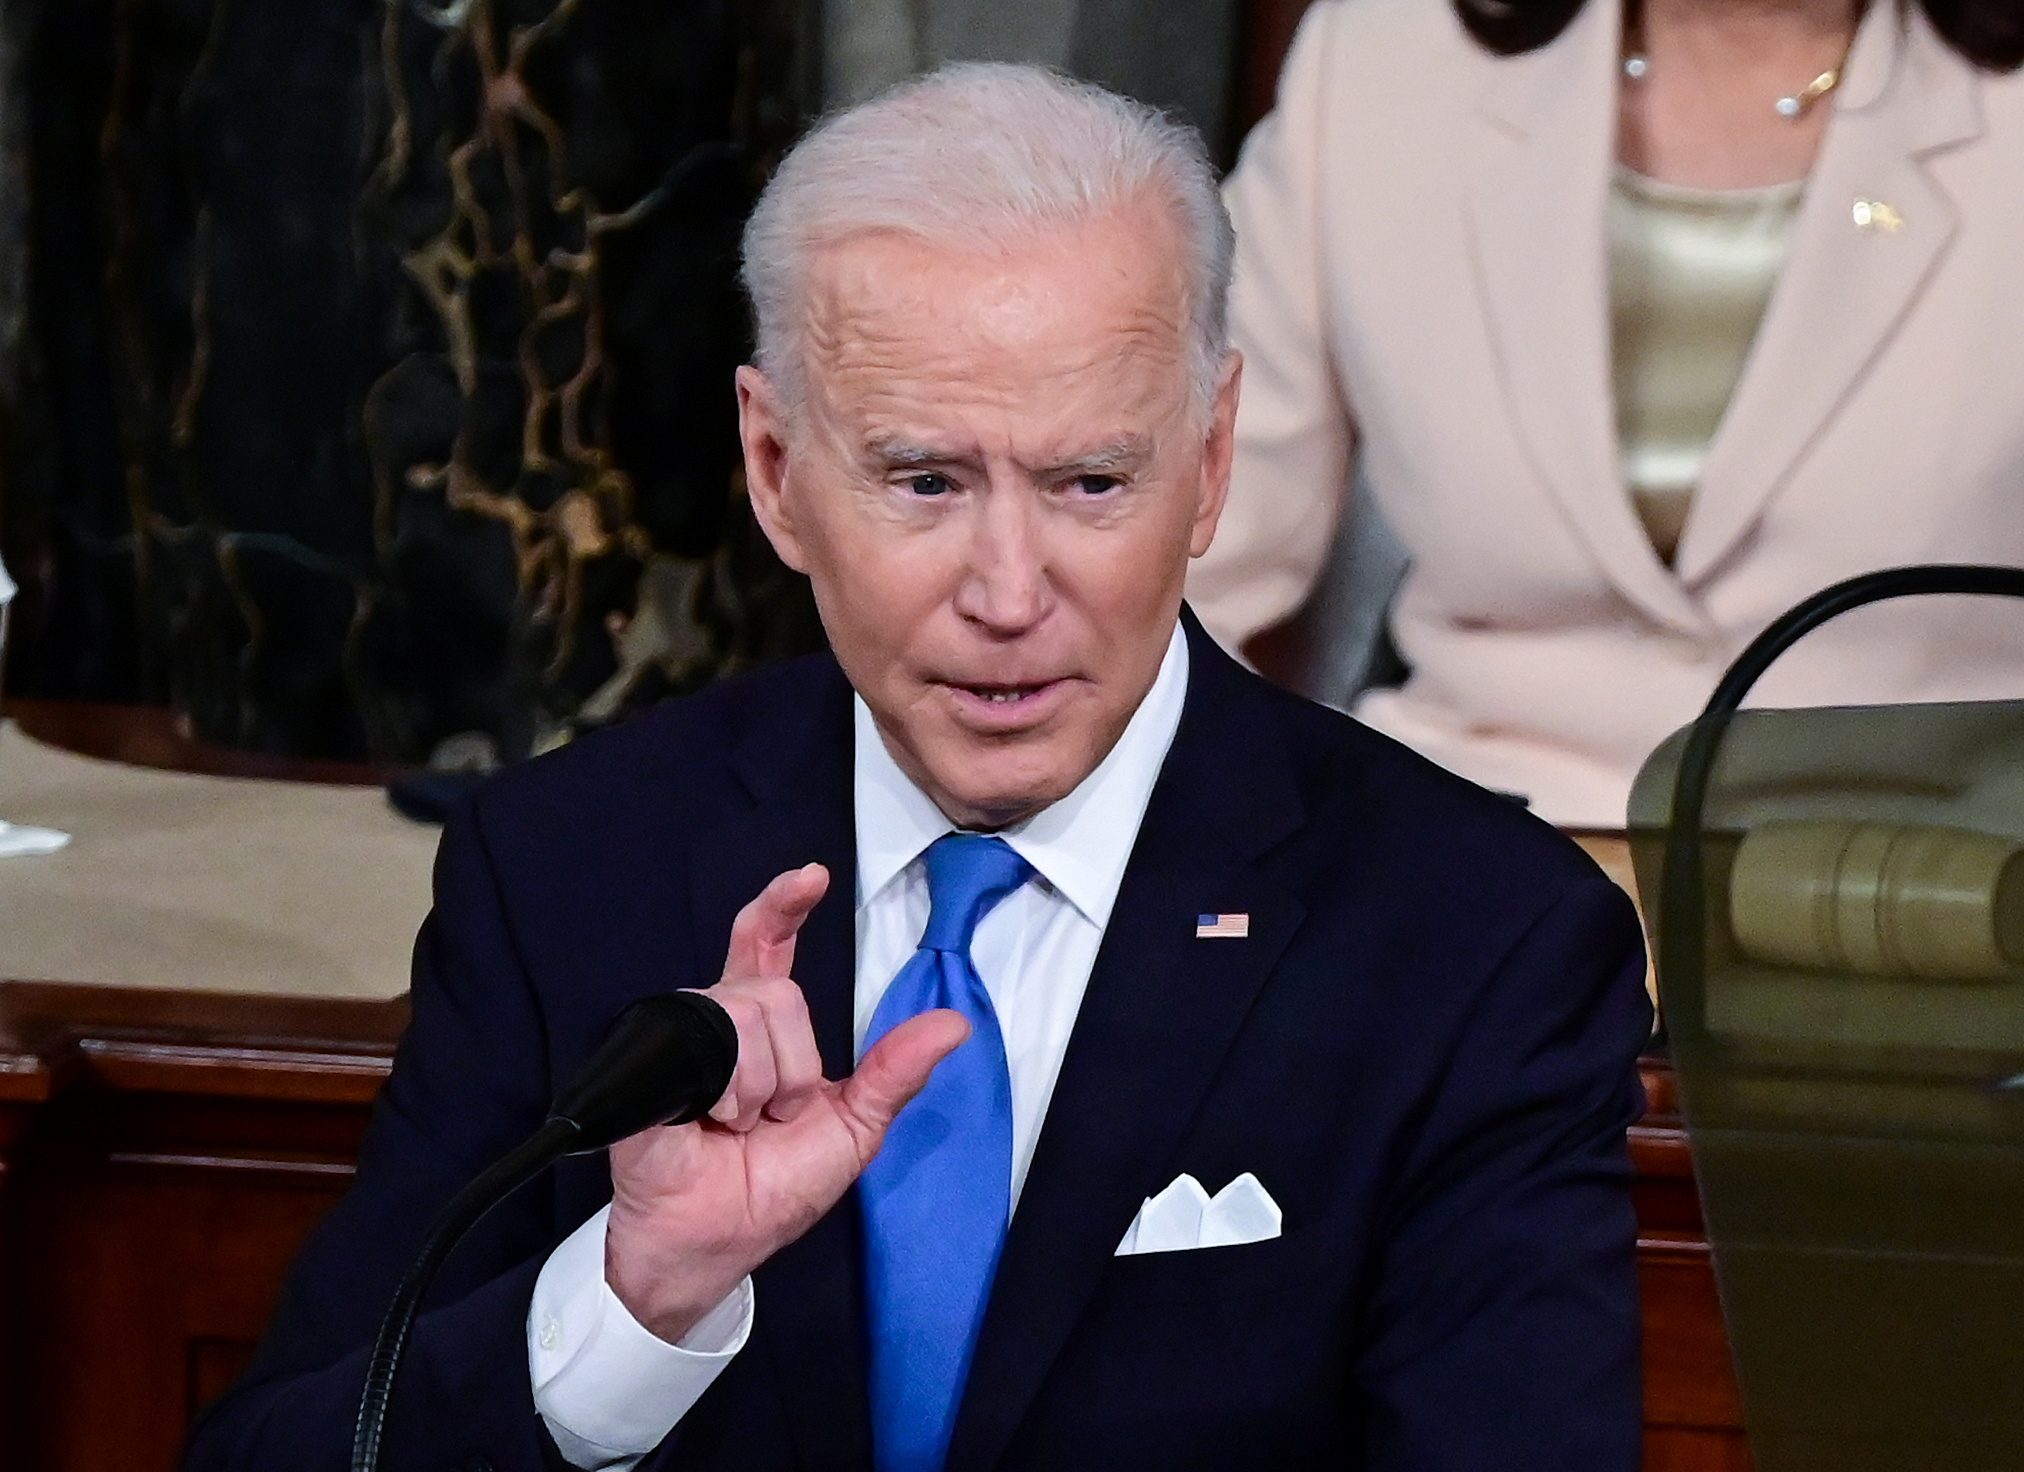 China ‘closing in fast,’ Biden warns Congress, as he asks for trillions in spending